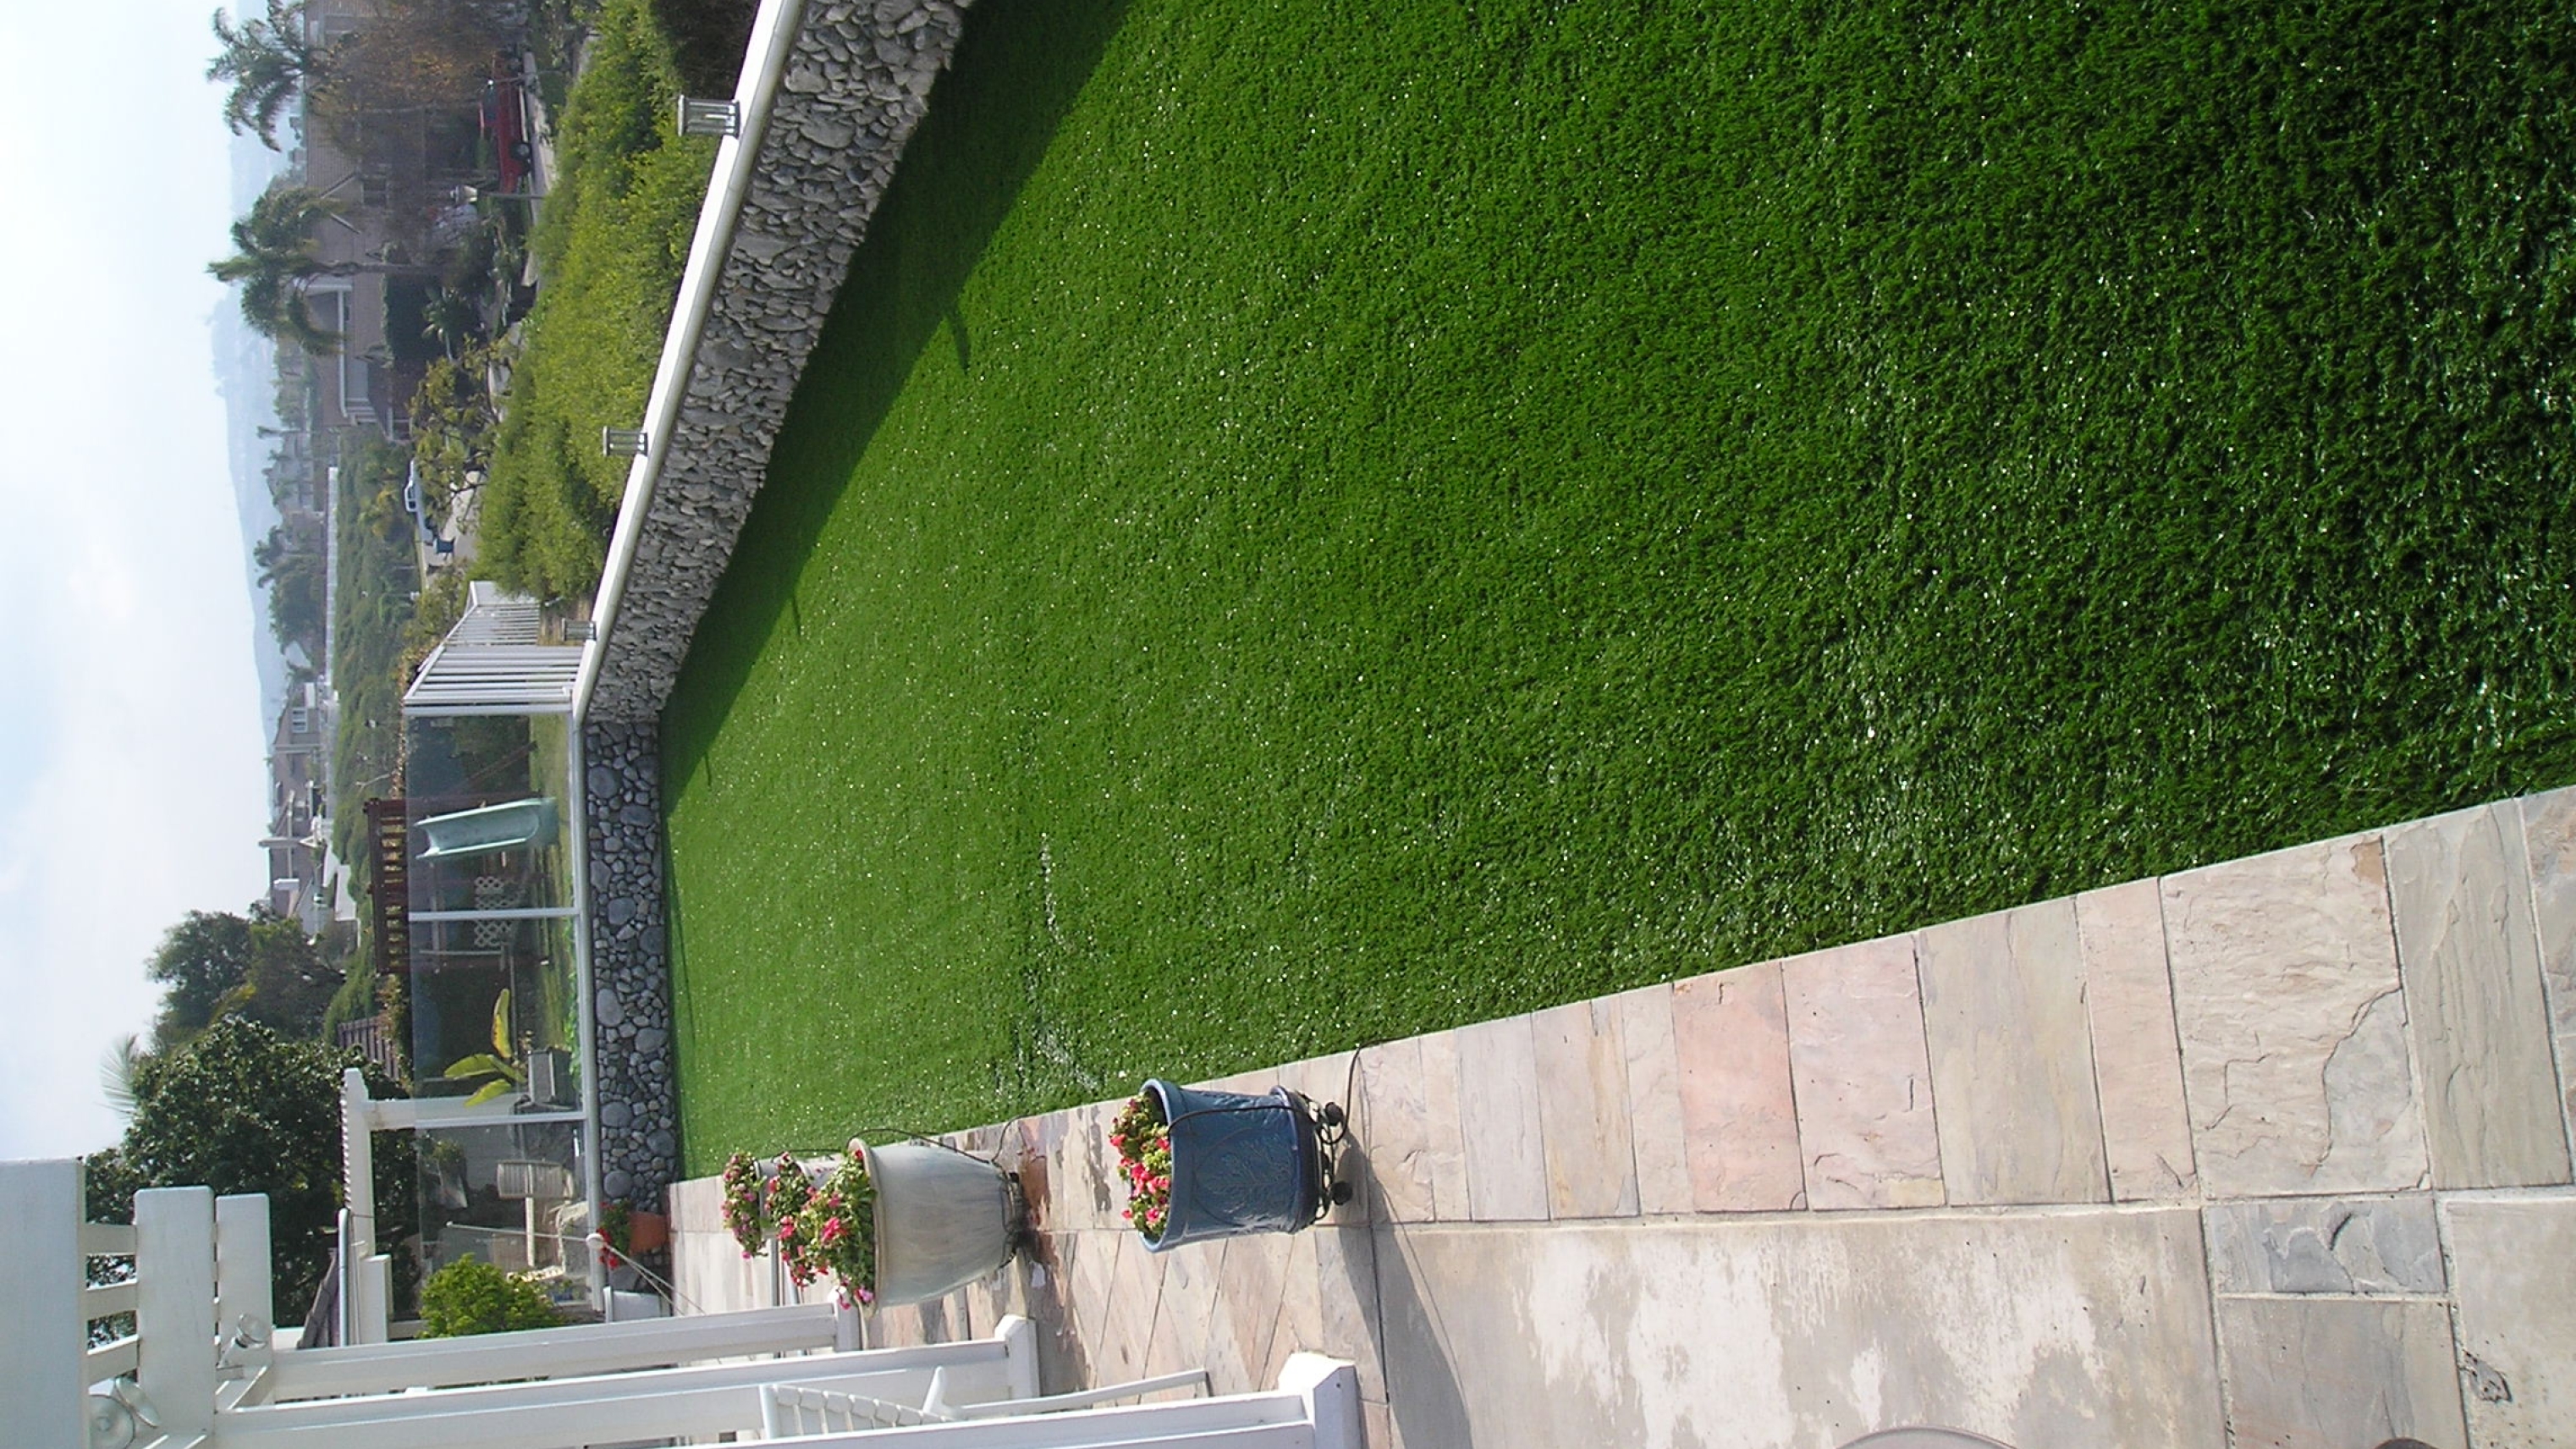 Cashmere 40 fake lawn cost,pet friendly artificial grass,fake lawn cost,pet friendly artificial grass